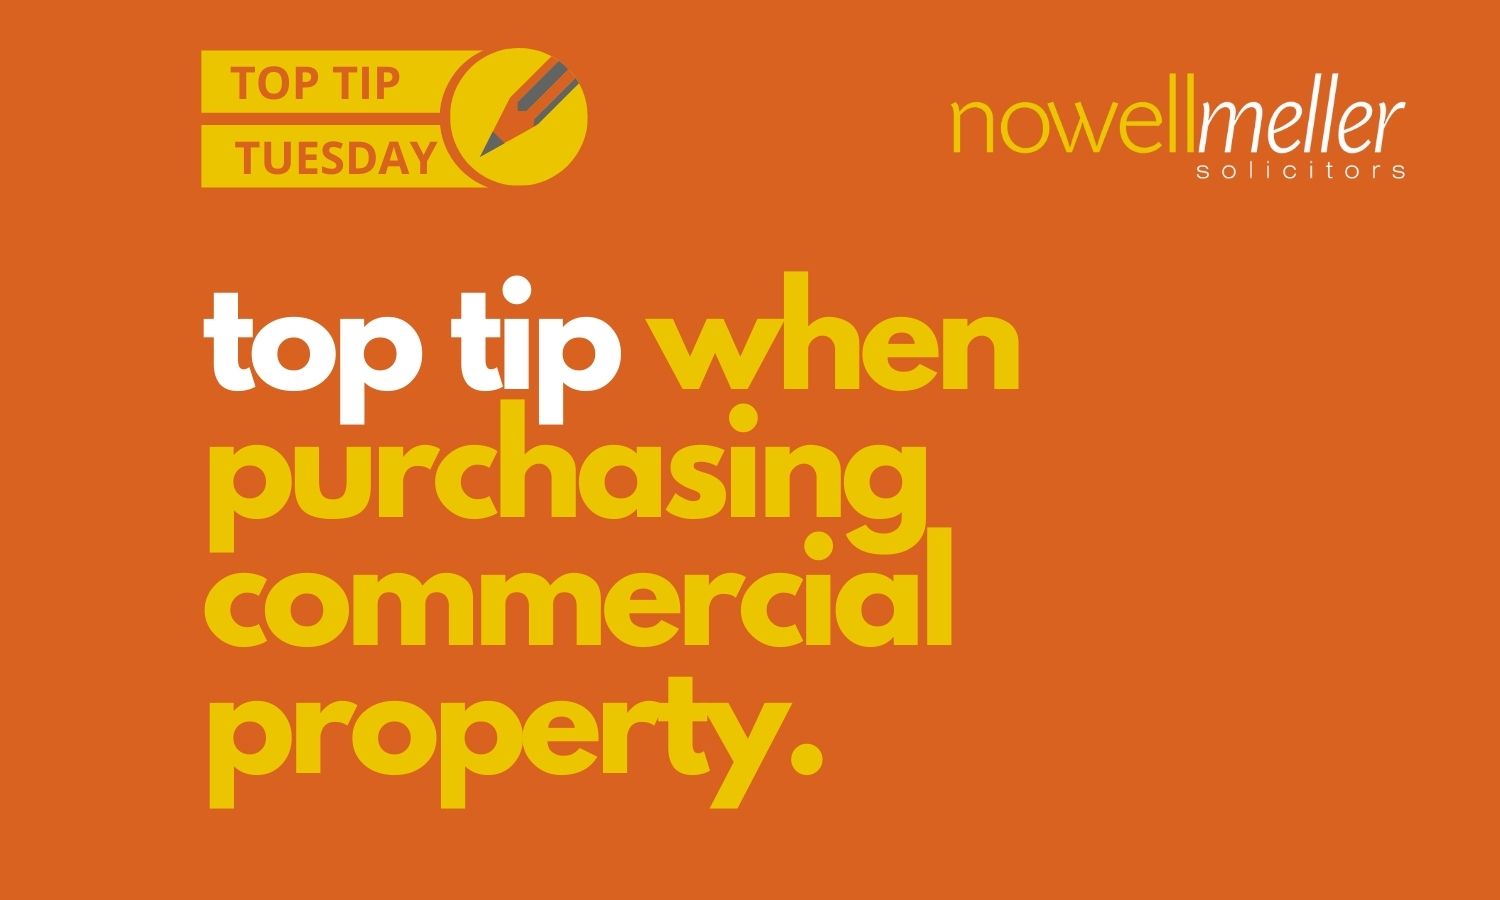 Top Tip Tuesday - Purchasing A Commercial Property